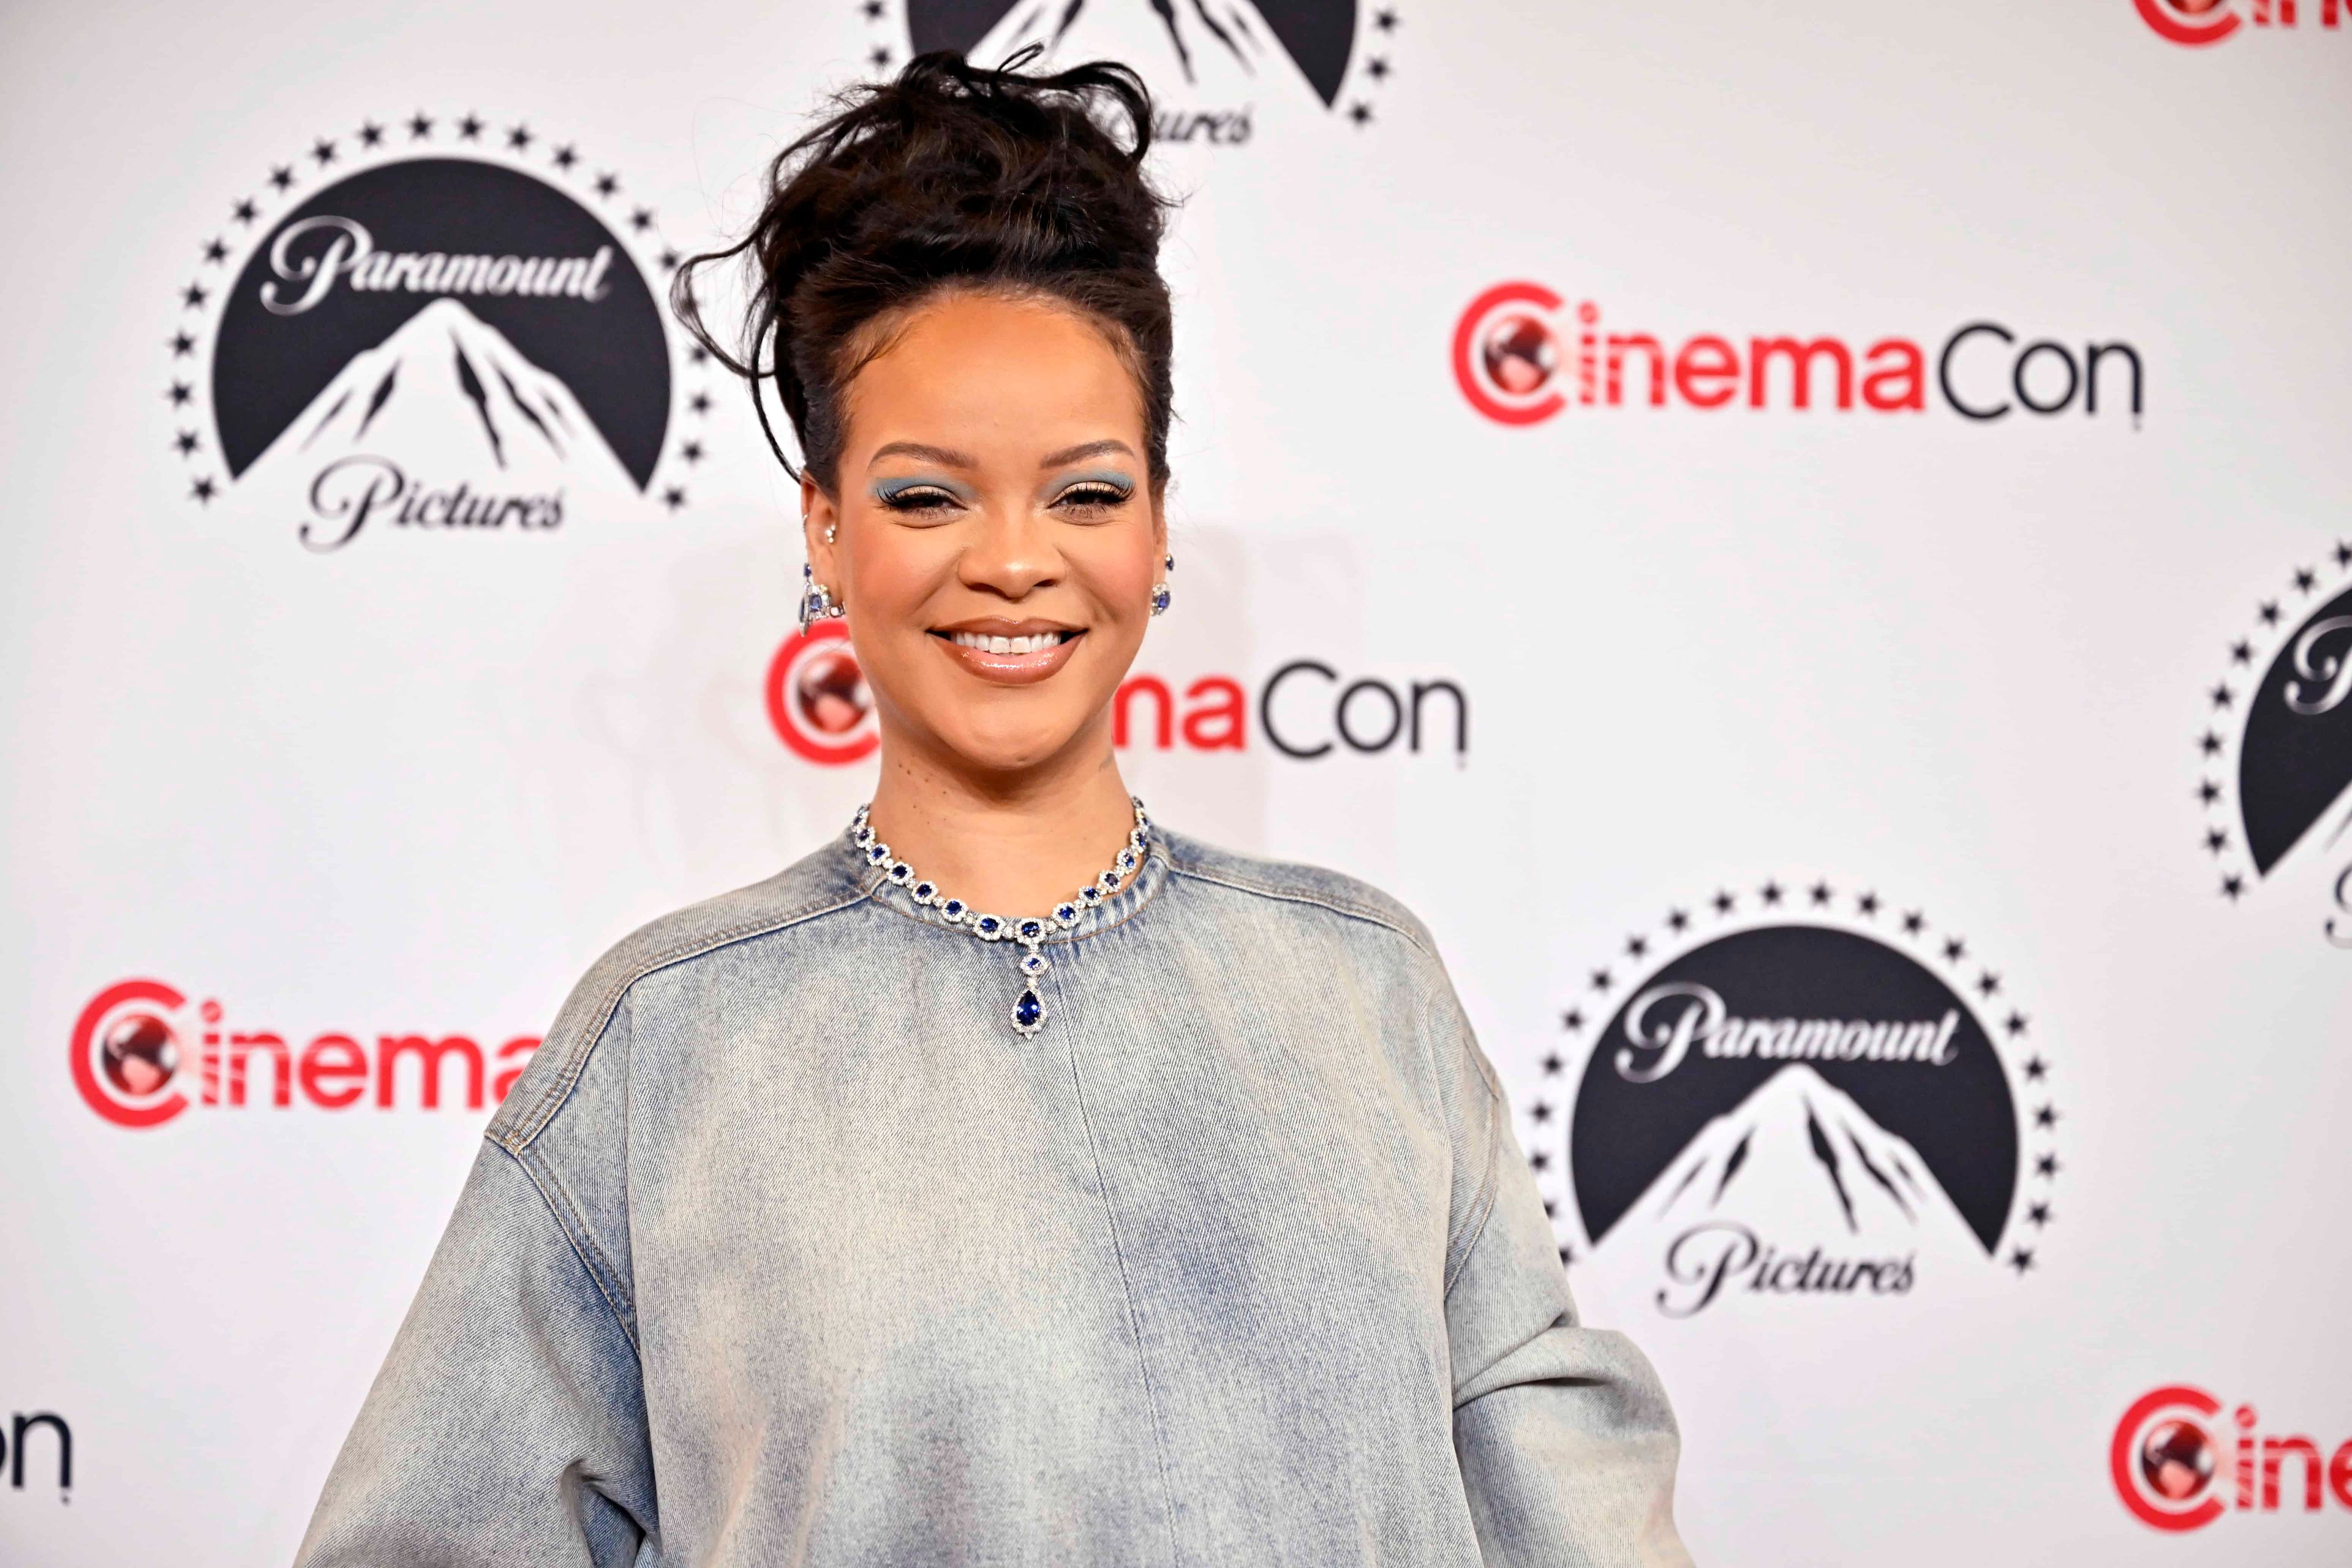 Rihanna Planning To Make a $32 Million Comeback, Deal With Live Nation